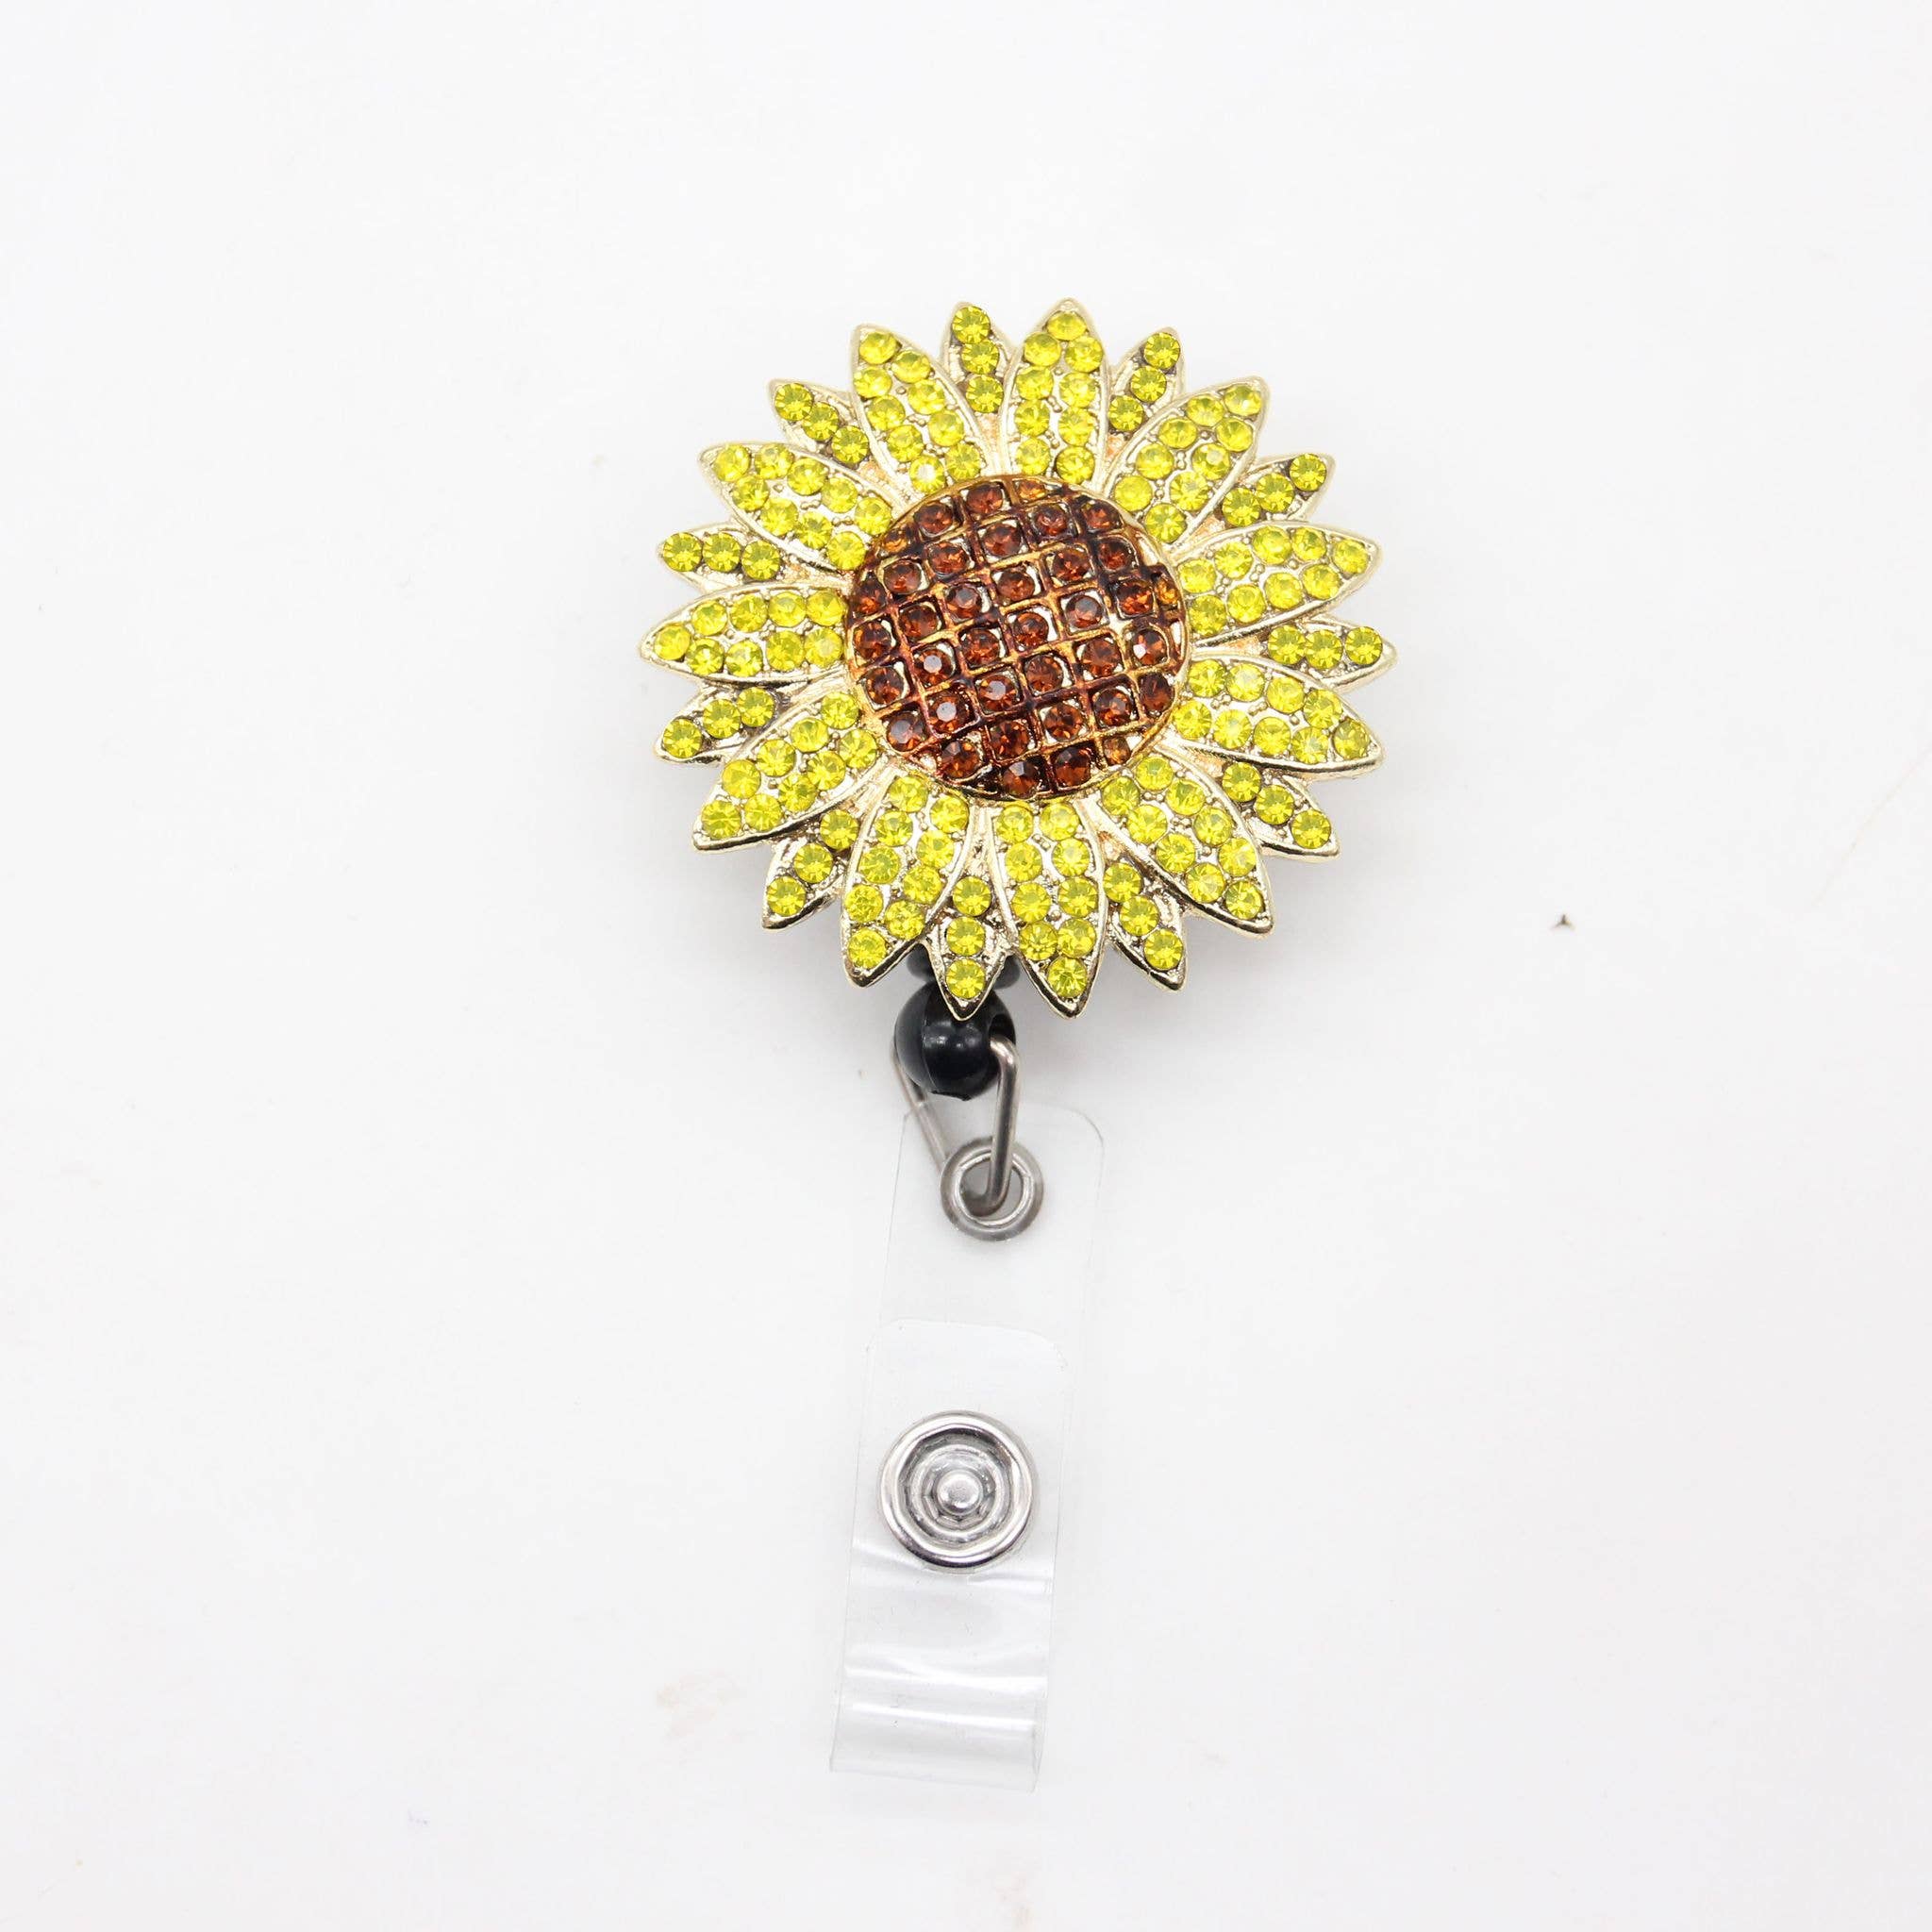 Purchase Wholesale badge reel. Free Returns & Net 60 Terms on Faire